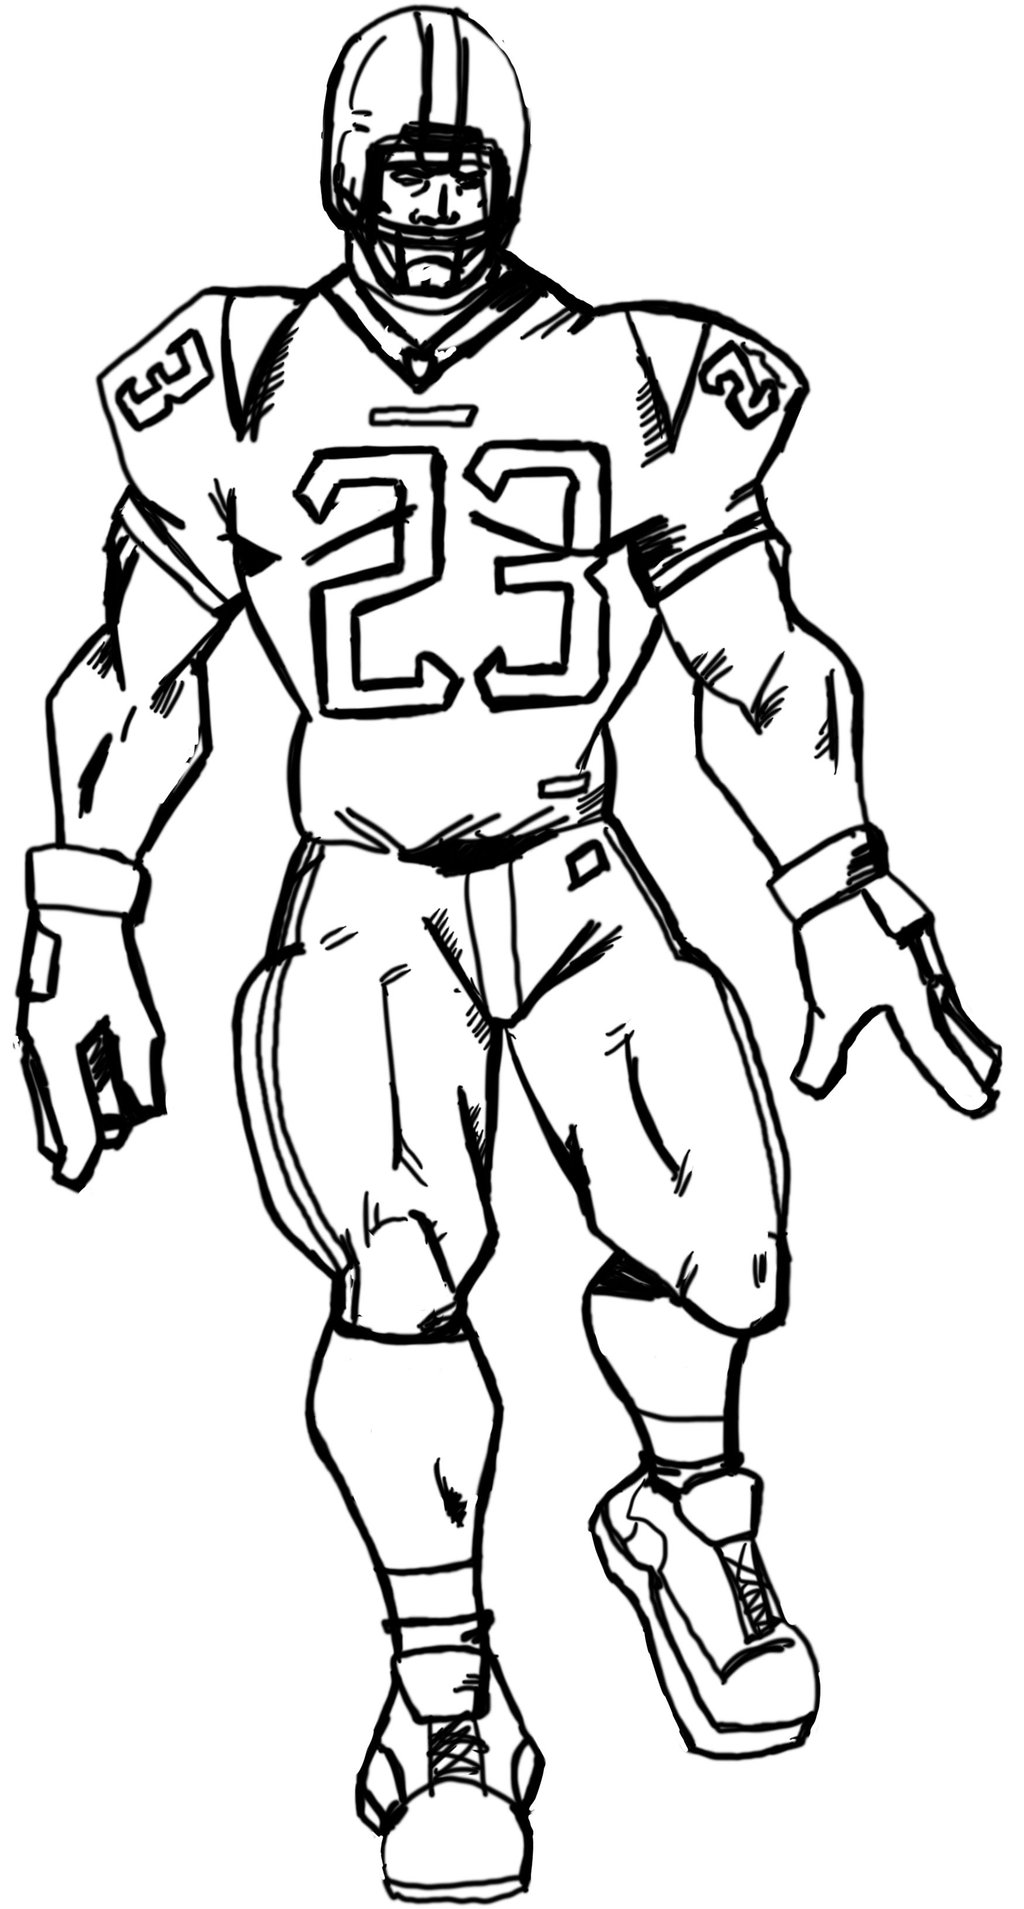 Drawing Of A Football Player - Cliparts.co